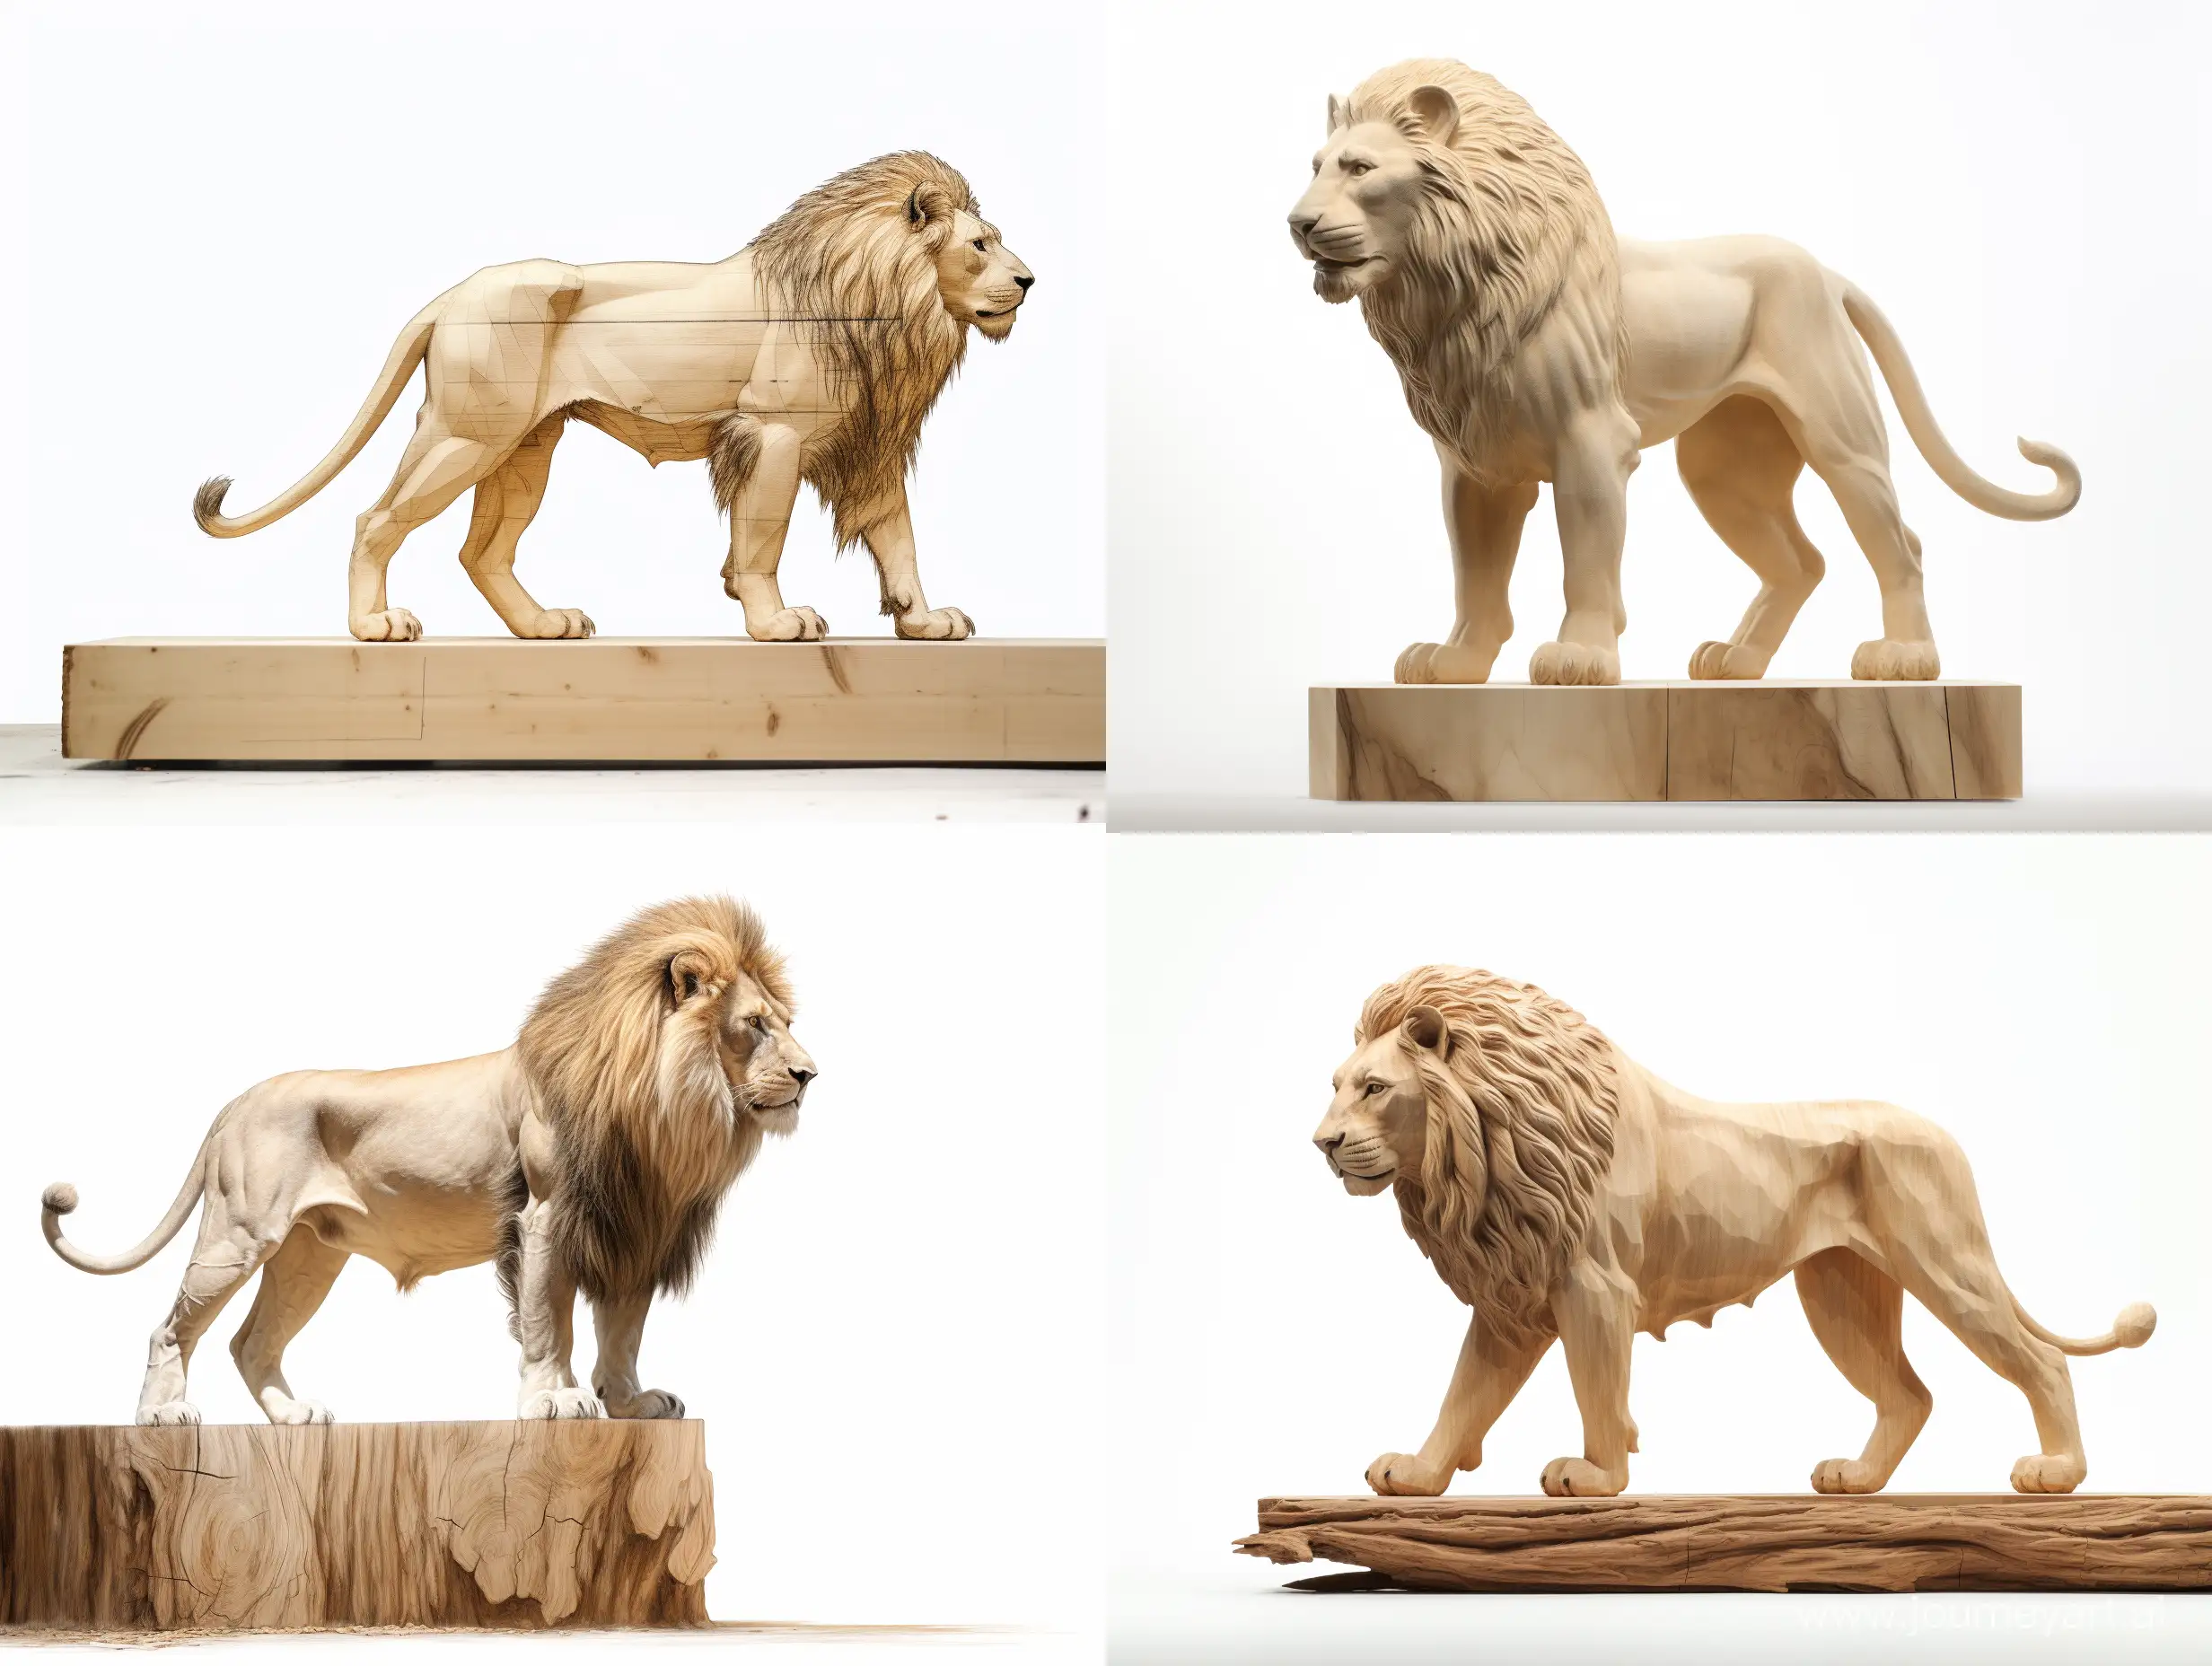 Dynamic-Panthera-Leo-Wooden-Sculpture-Ready-for-Battle